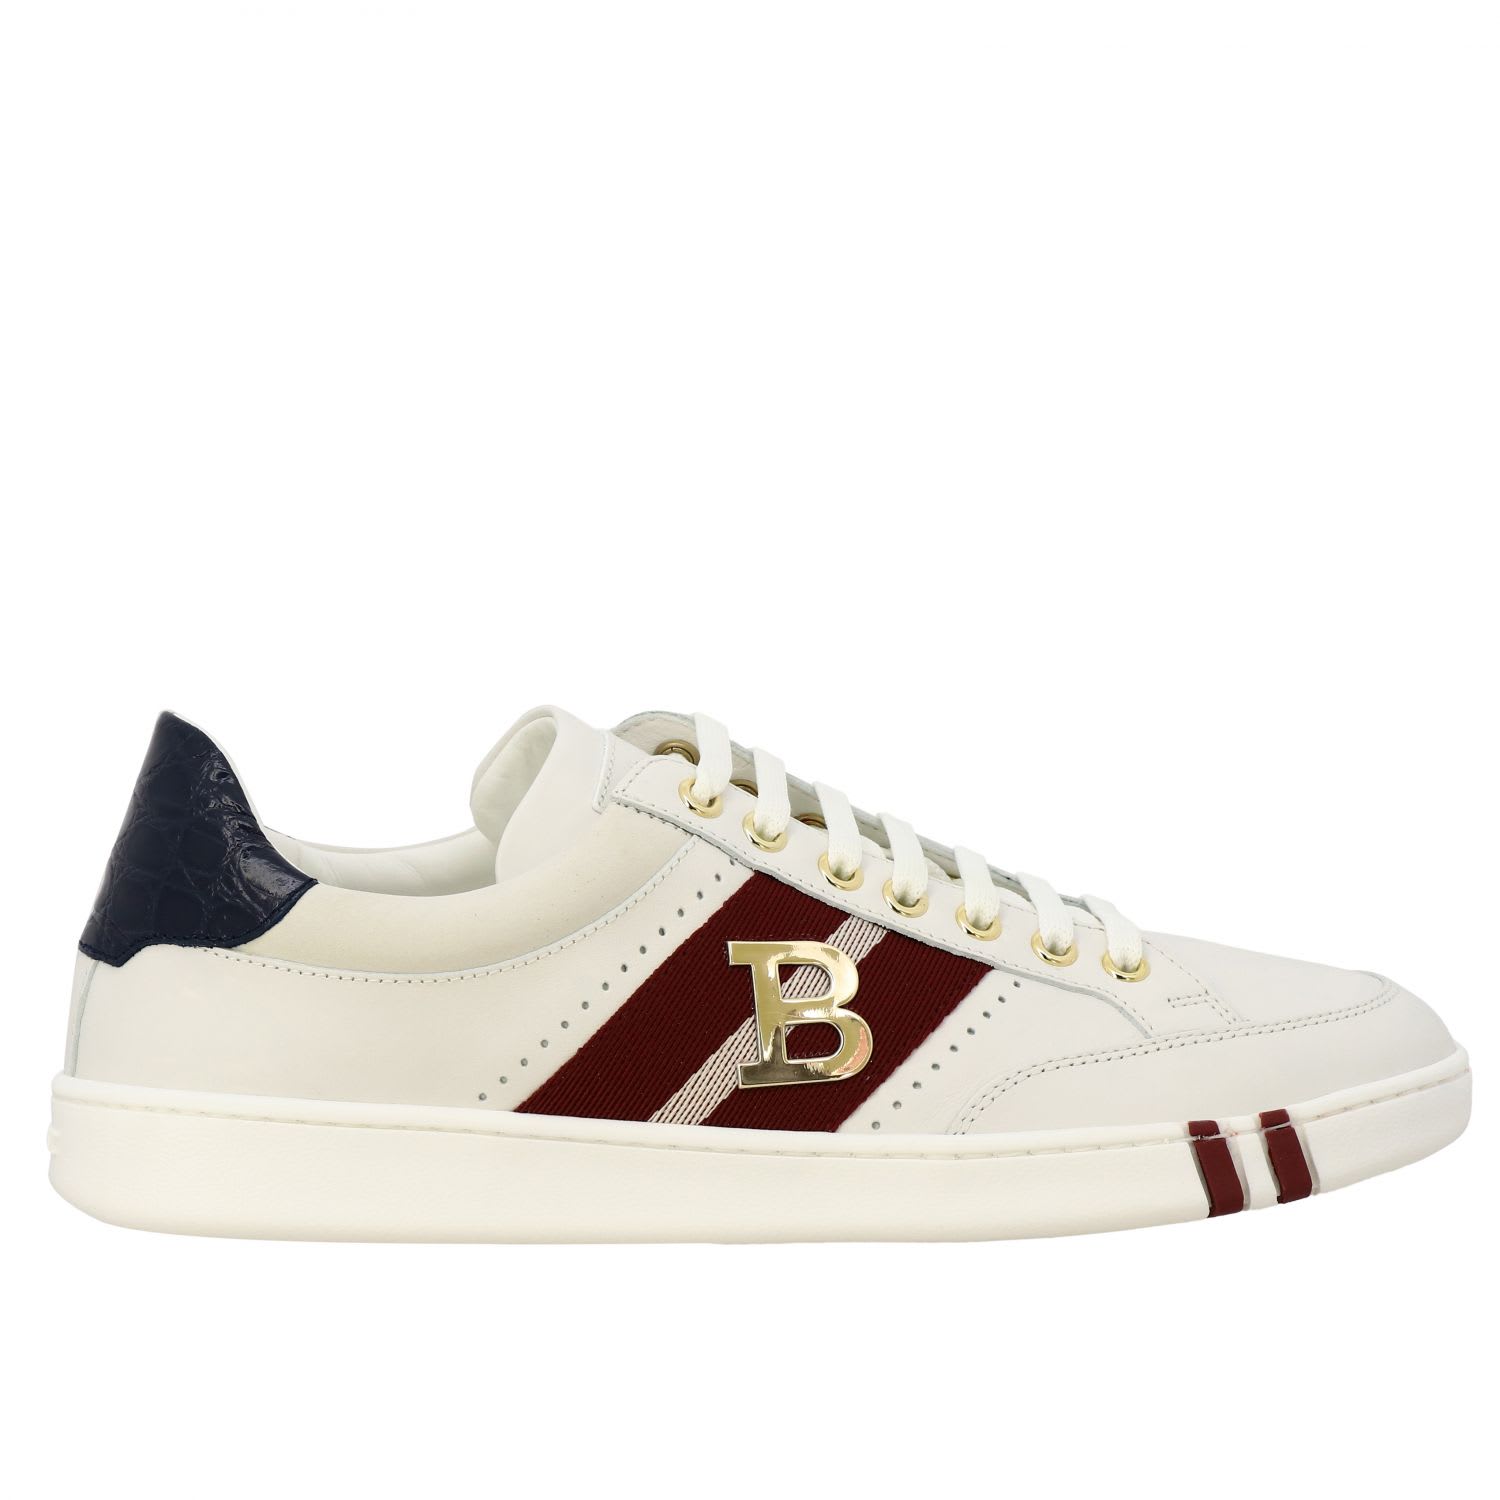 BALLY SNEAKERS IN SUEDE LEATHER AND CANVAS WITH METALLIC LOGO,11203287